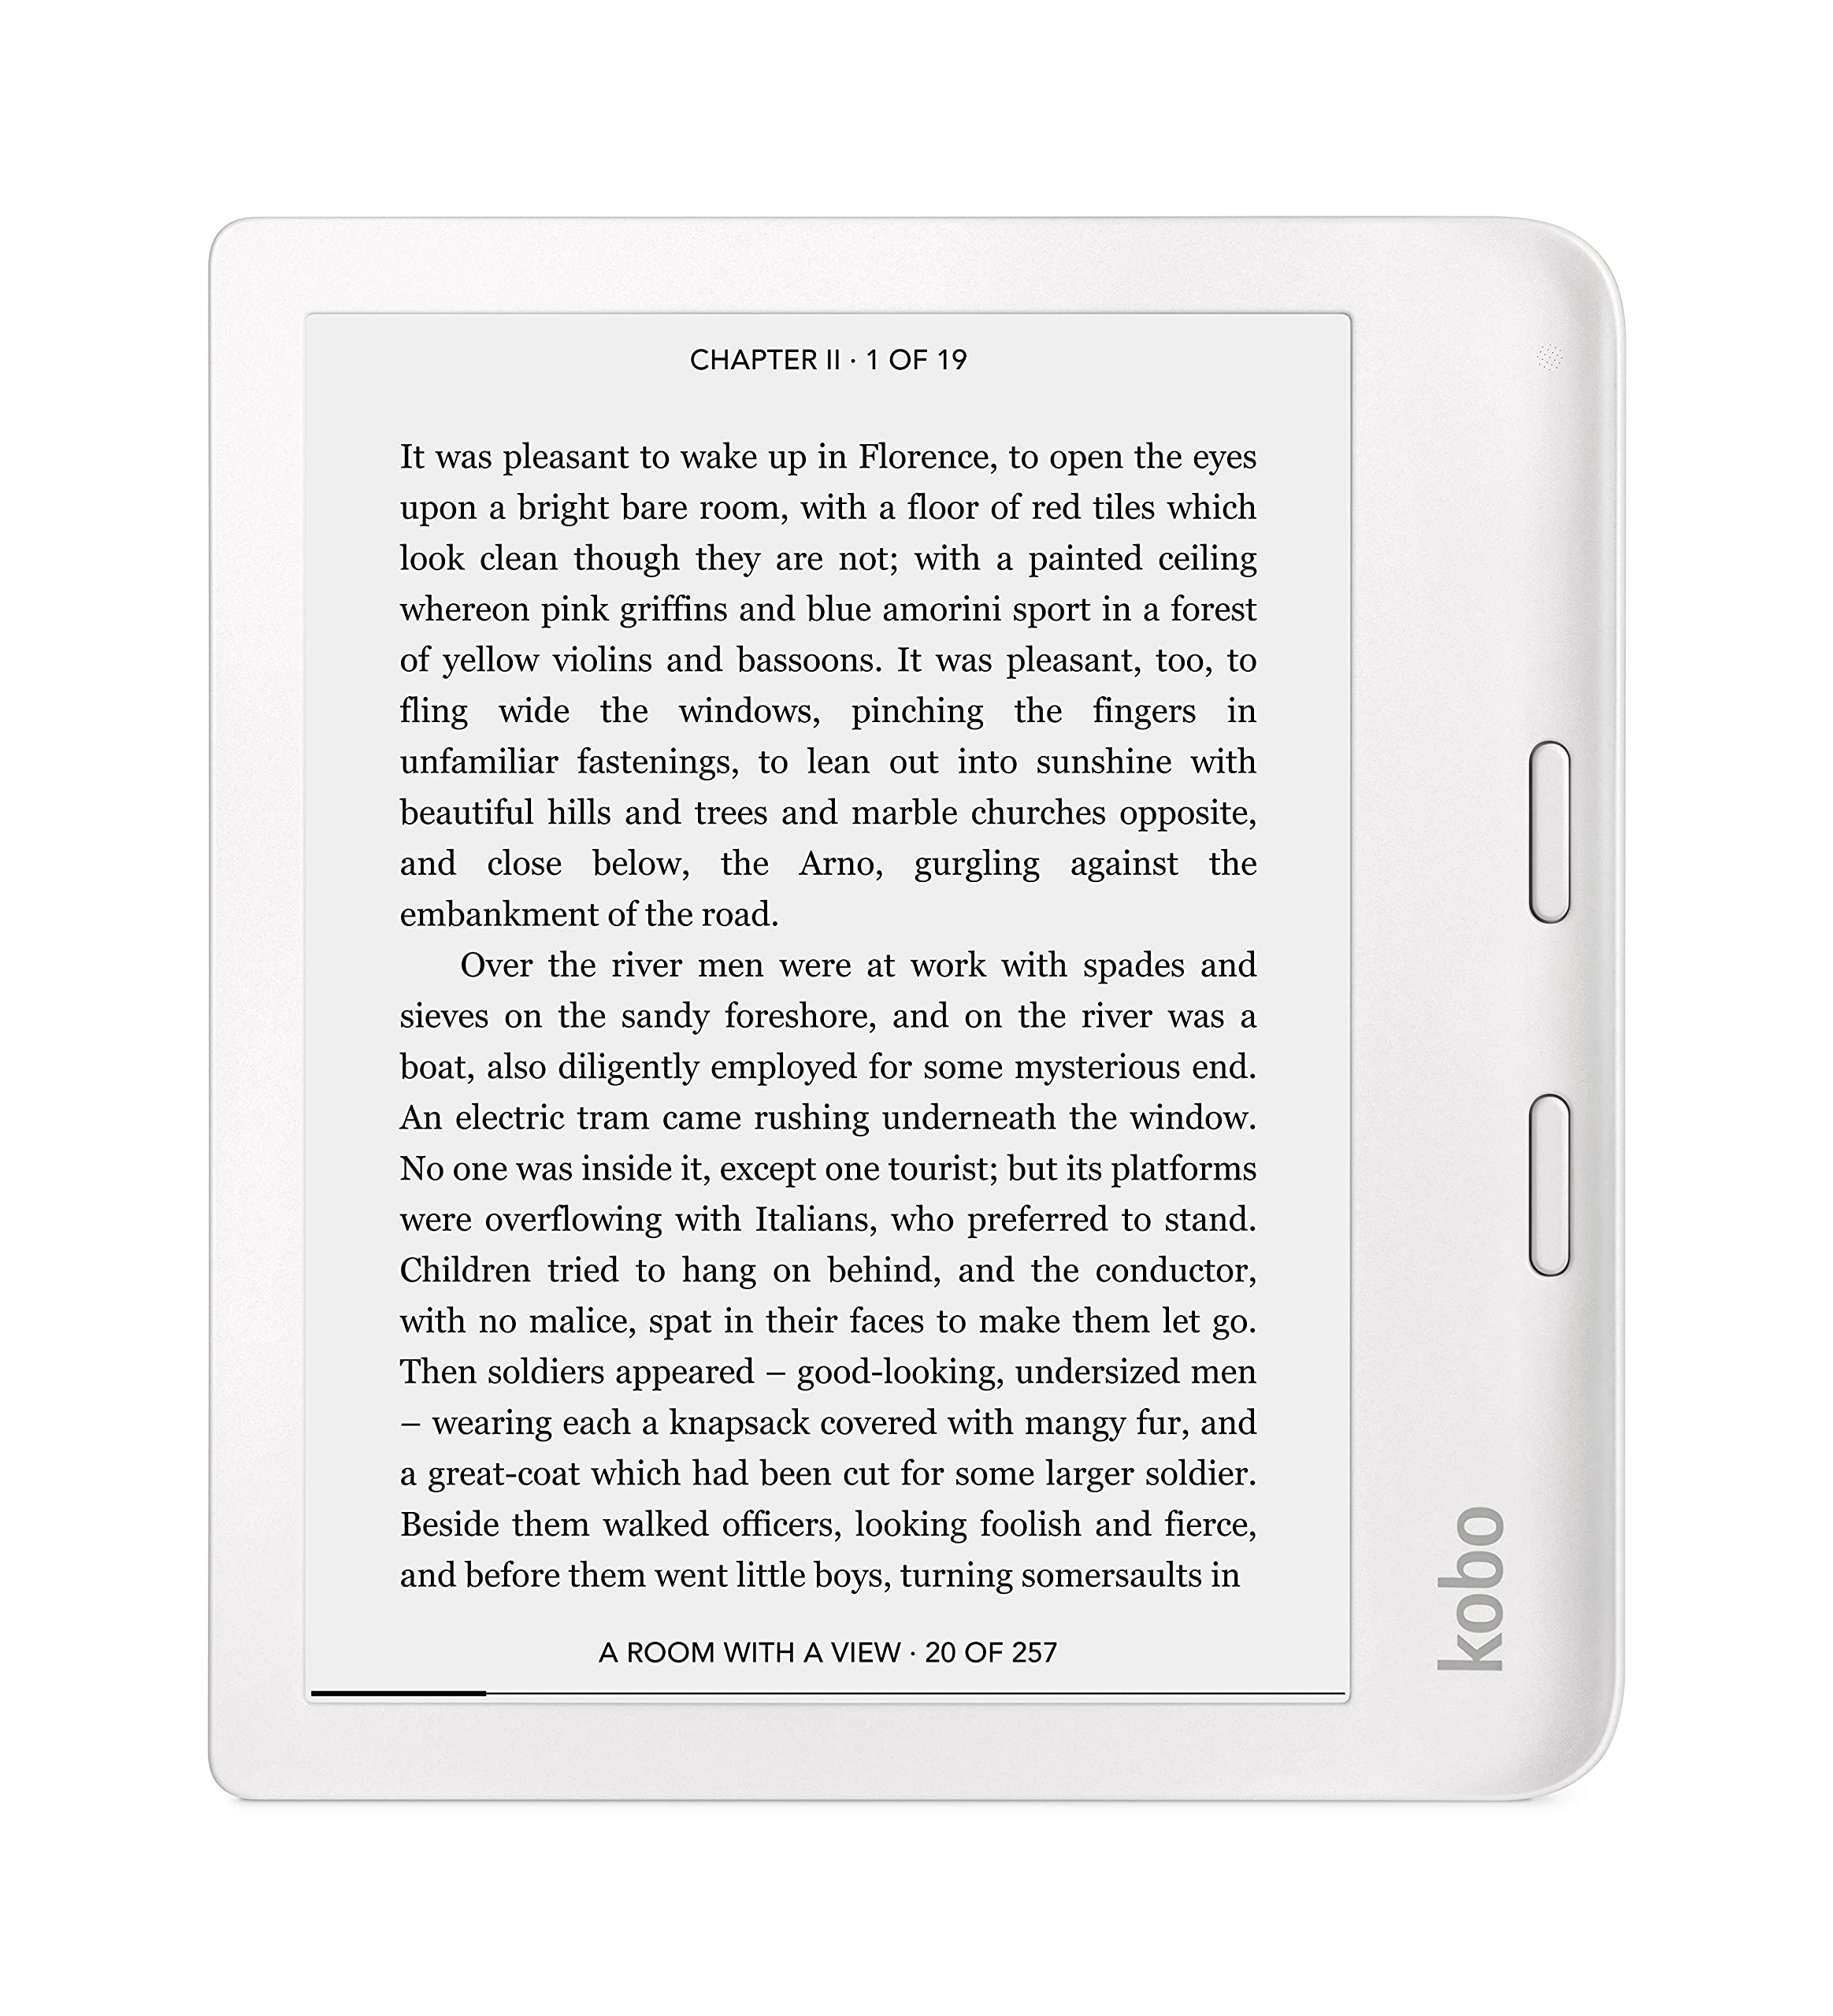 Kobo Libra 2  eReader  7A glare Free Touchscreen  Waterproof  Adjustable Brightness and color Temperature  Blue Light Reduction 